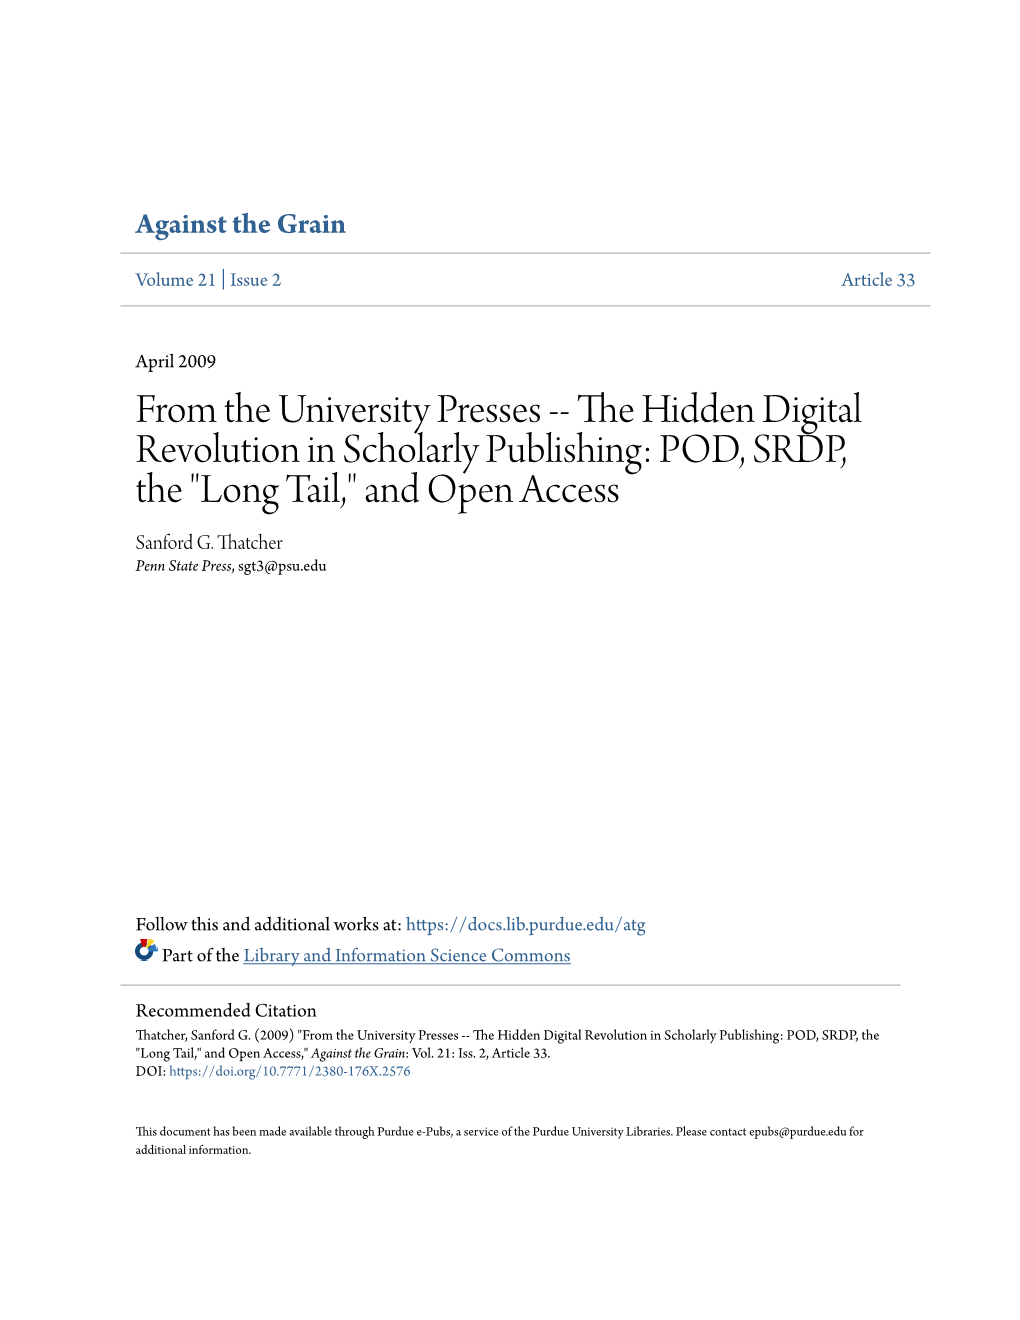 From the University Presses -- the Iddeh N Digital Revolution in Scholarly Publishing: POD, SRDP, the "Long Tail," and Open Access Sanford G